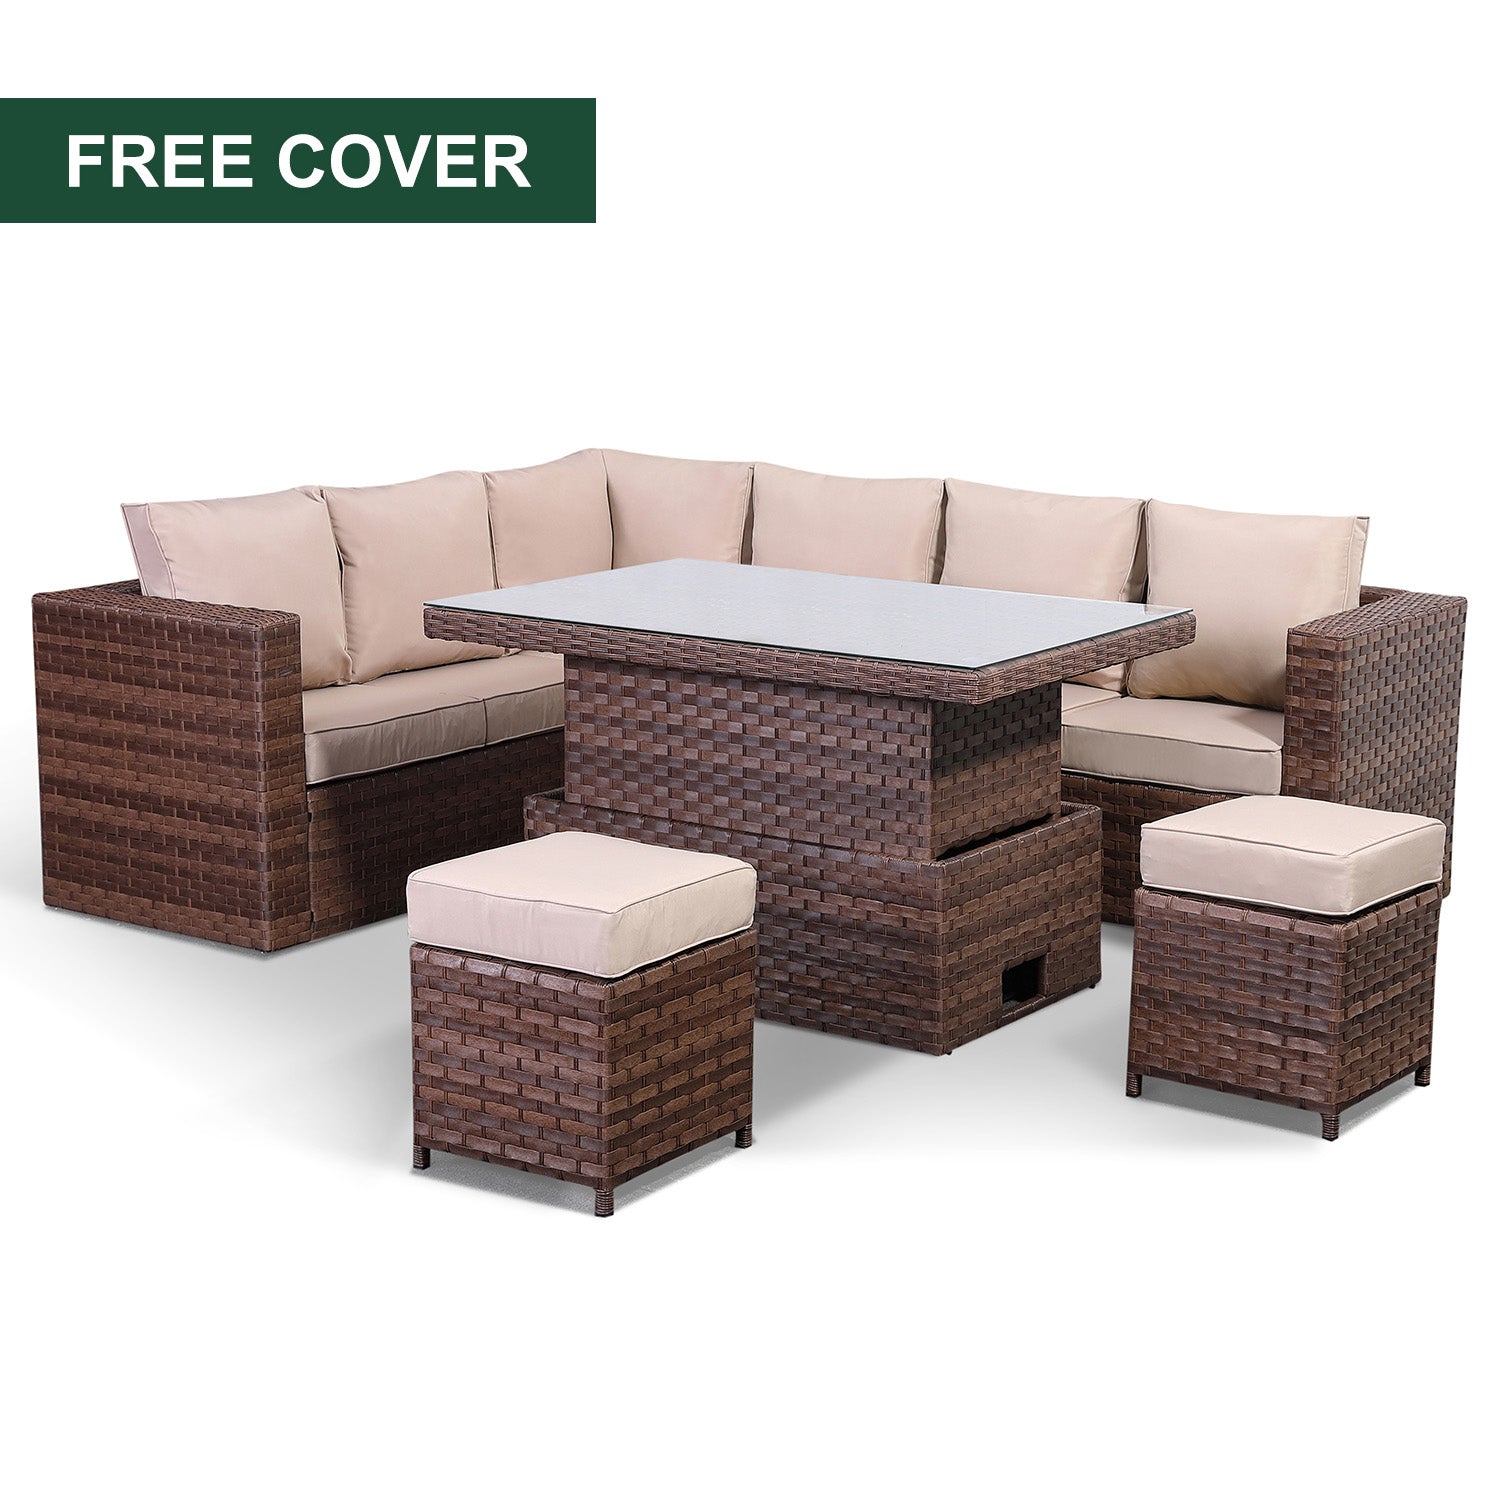 B3..Pansy Range Large Dining corner sofa Set with Rising Table in wide Brown Weave